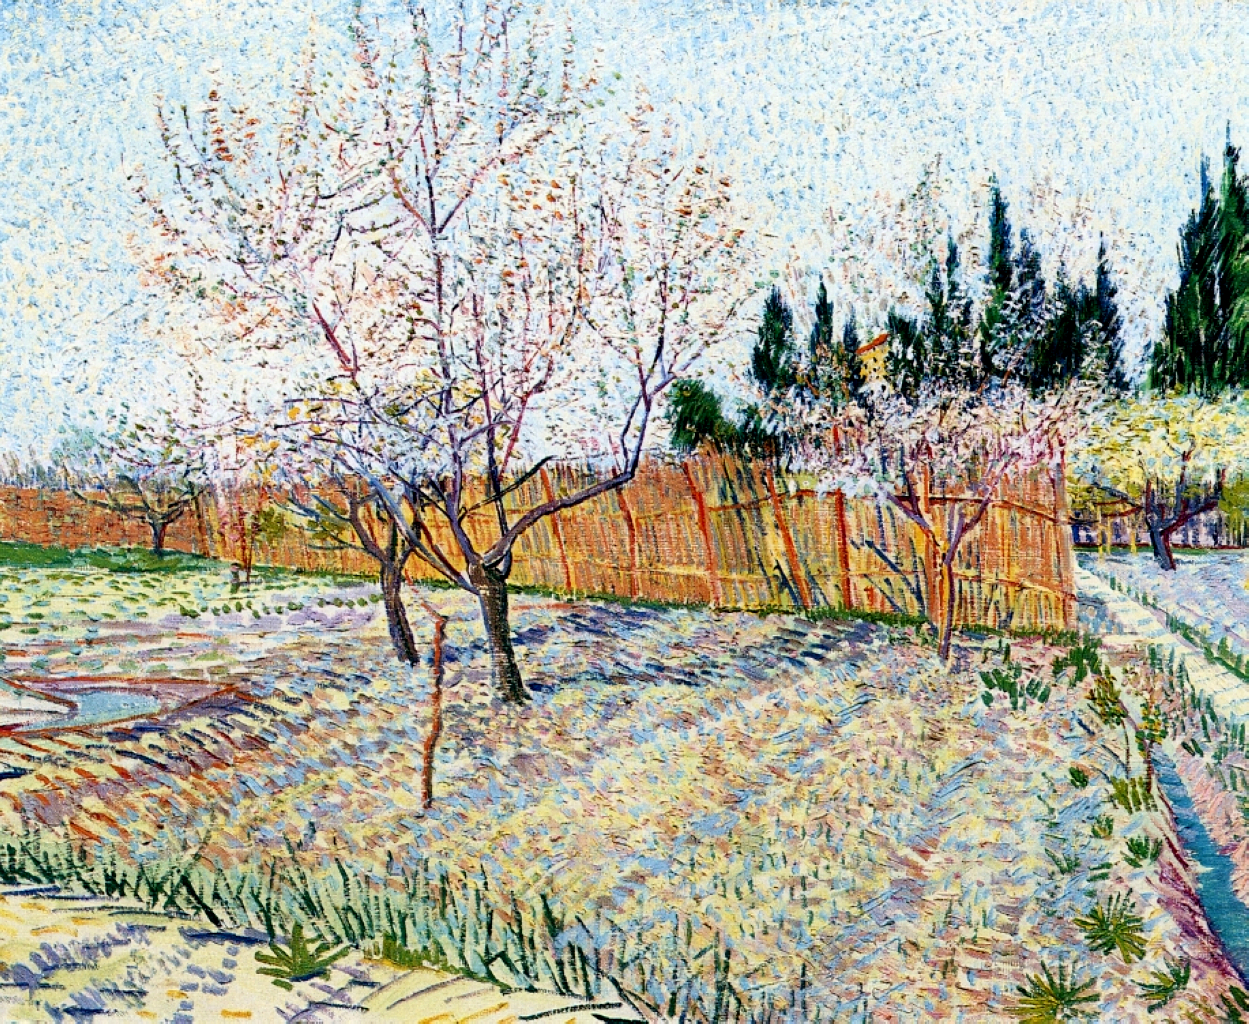 Orchard with Peach Trees in Blossom, 1888 - Vincent van Gogh - WikiArt.org